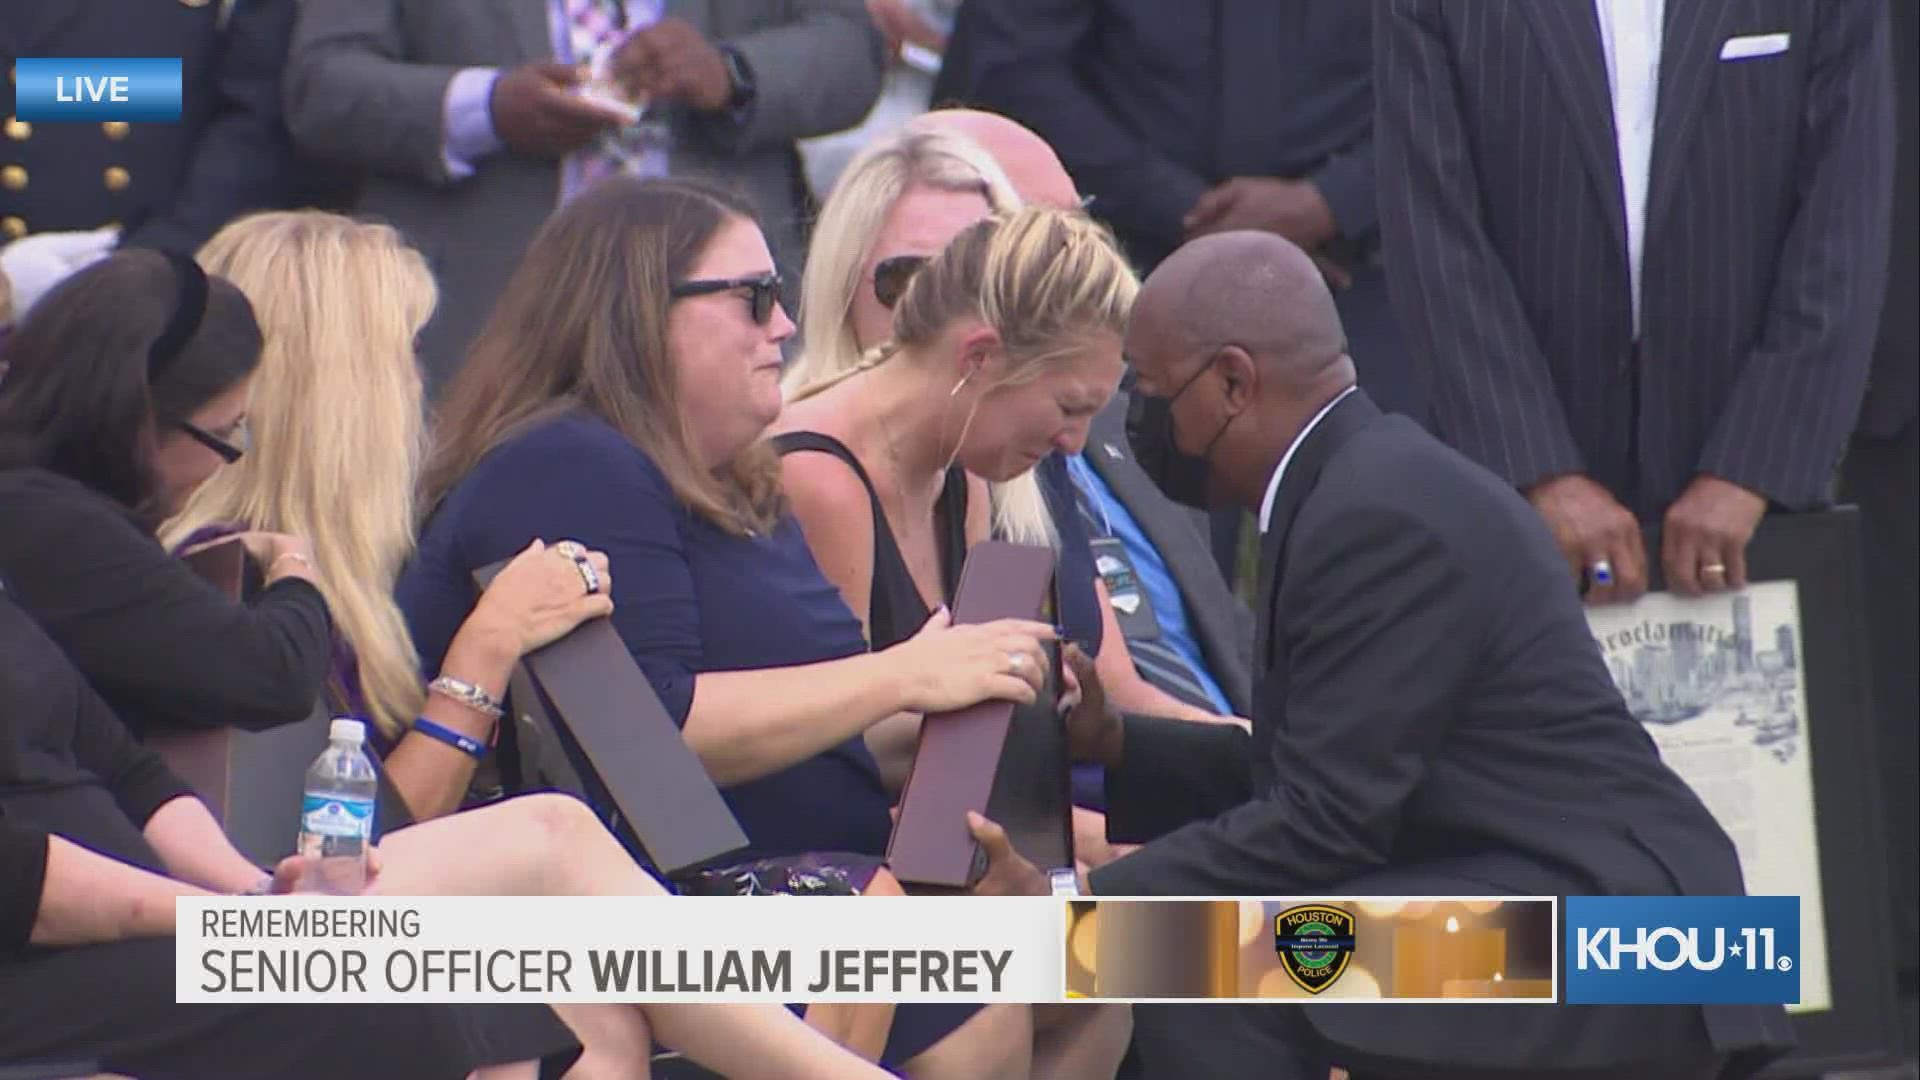 A somber moment outside Grace Church as the family of HPD officer William Jeffrey accept the U.S. flag from his casket.